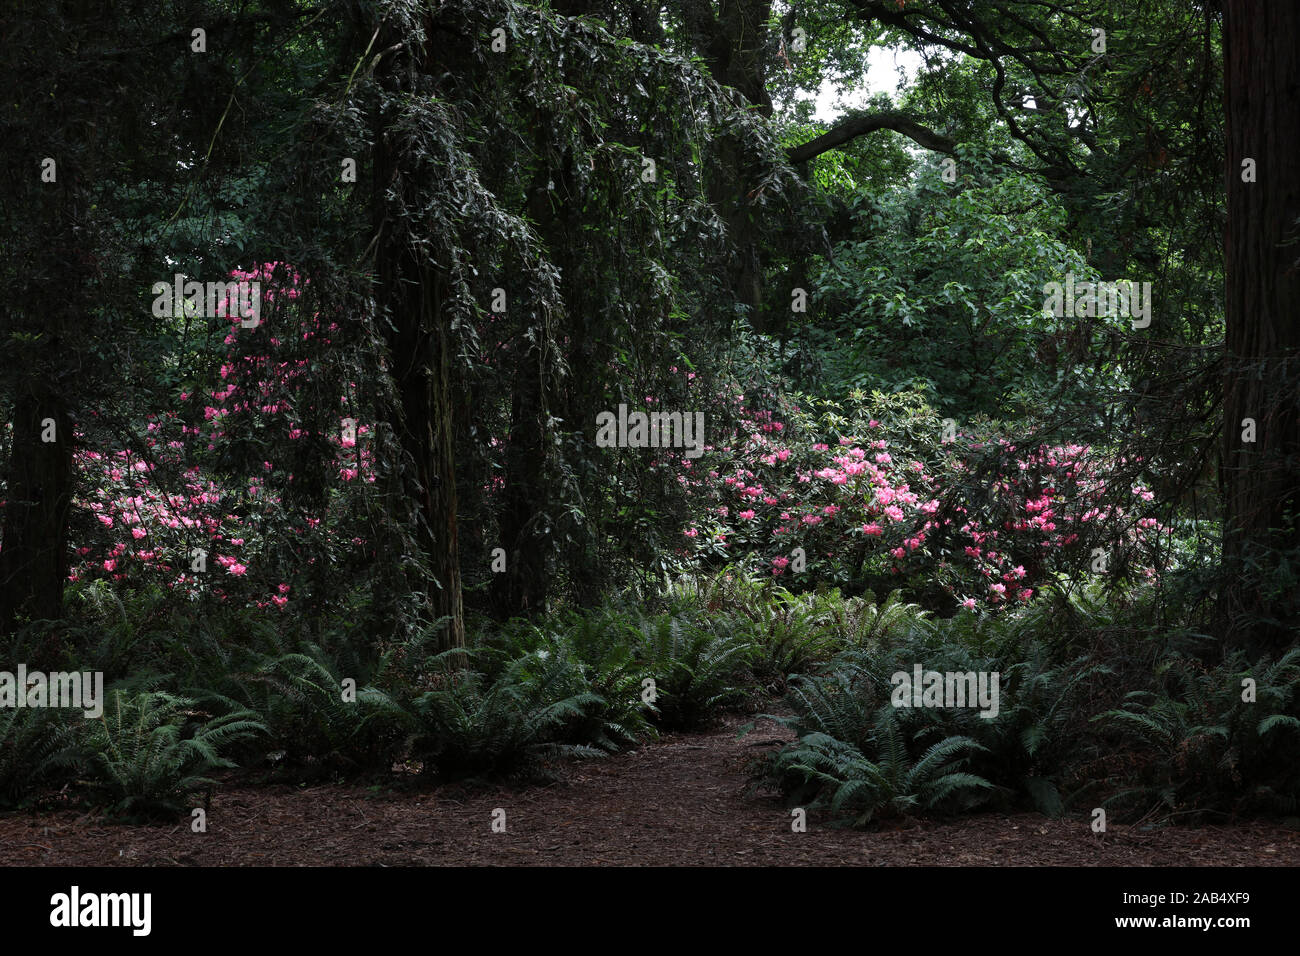 Rhododendrons, surrounded by conifers, are seen in flower in a clearance of a woodland area of Kew Gardens growing in an acid soil. Stock Photo